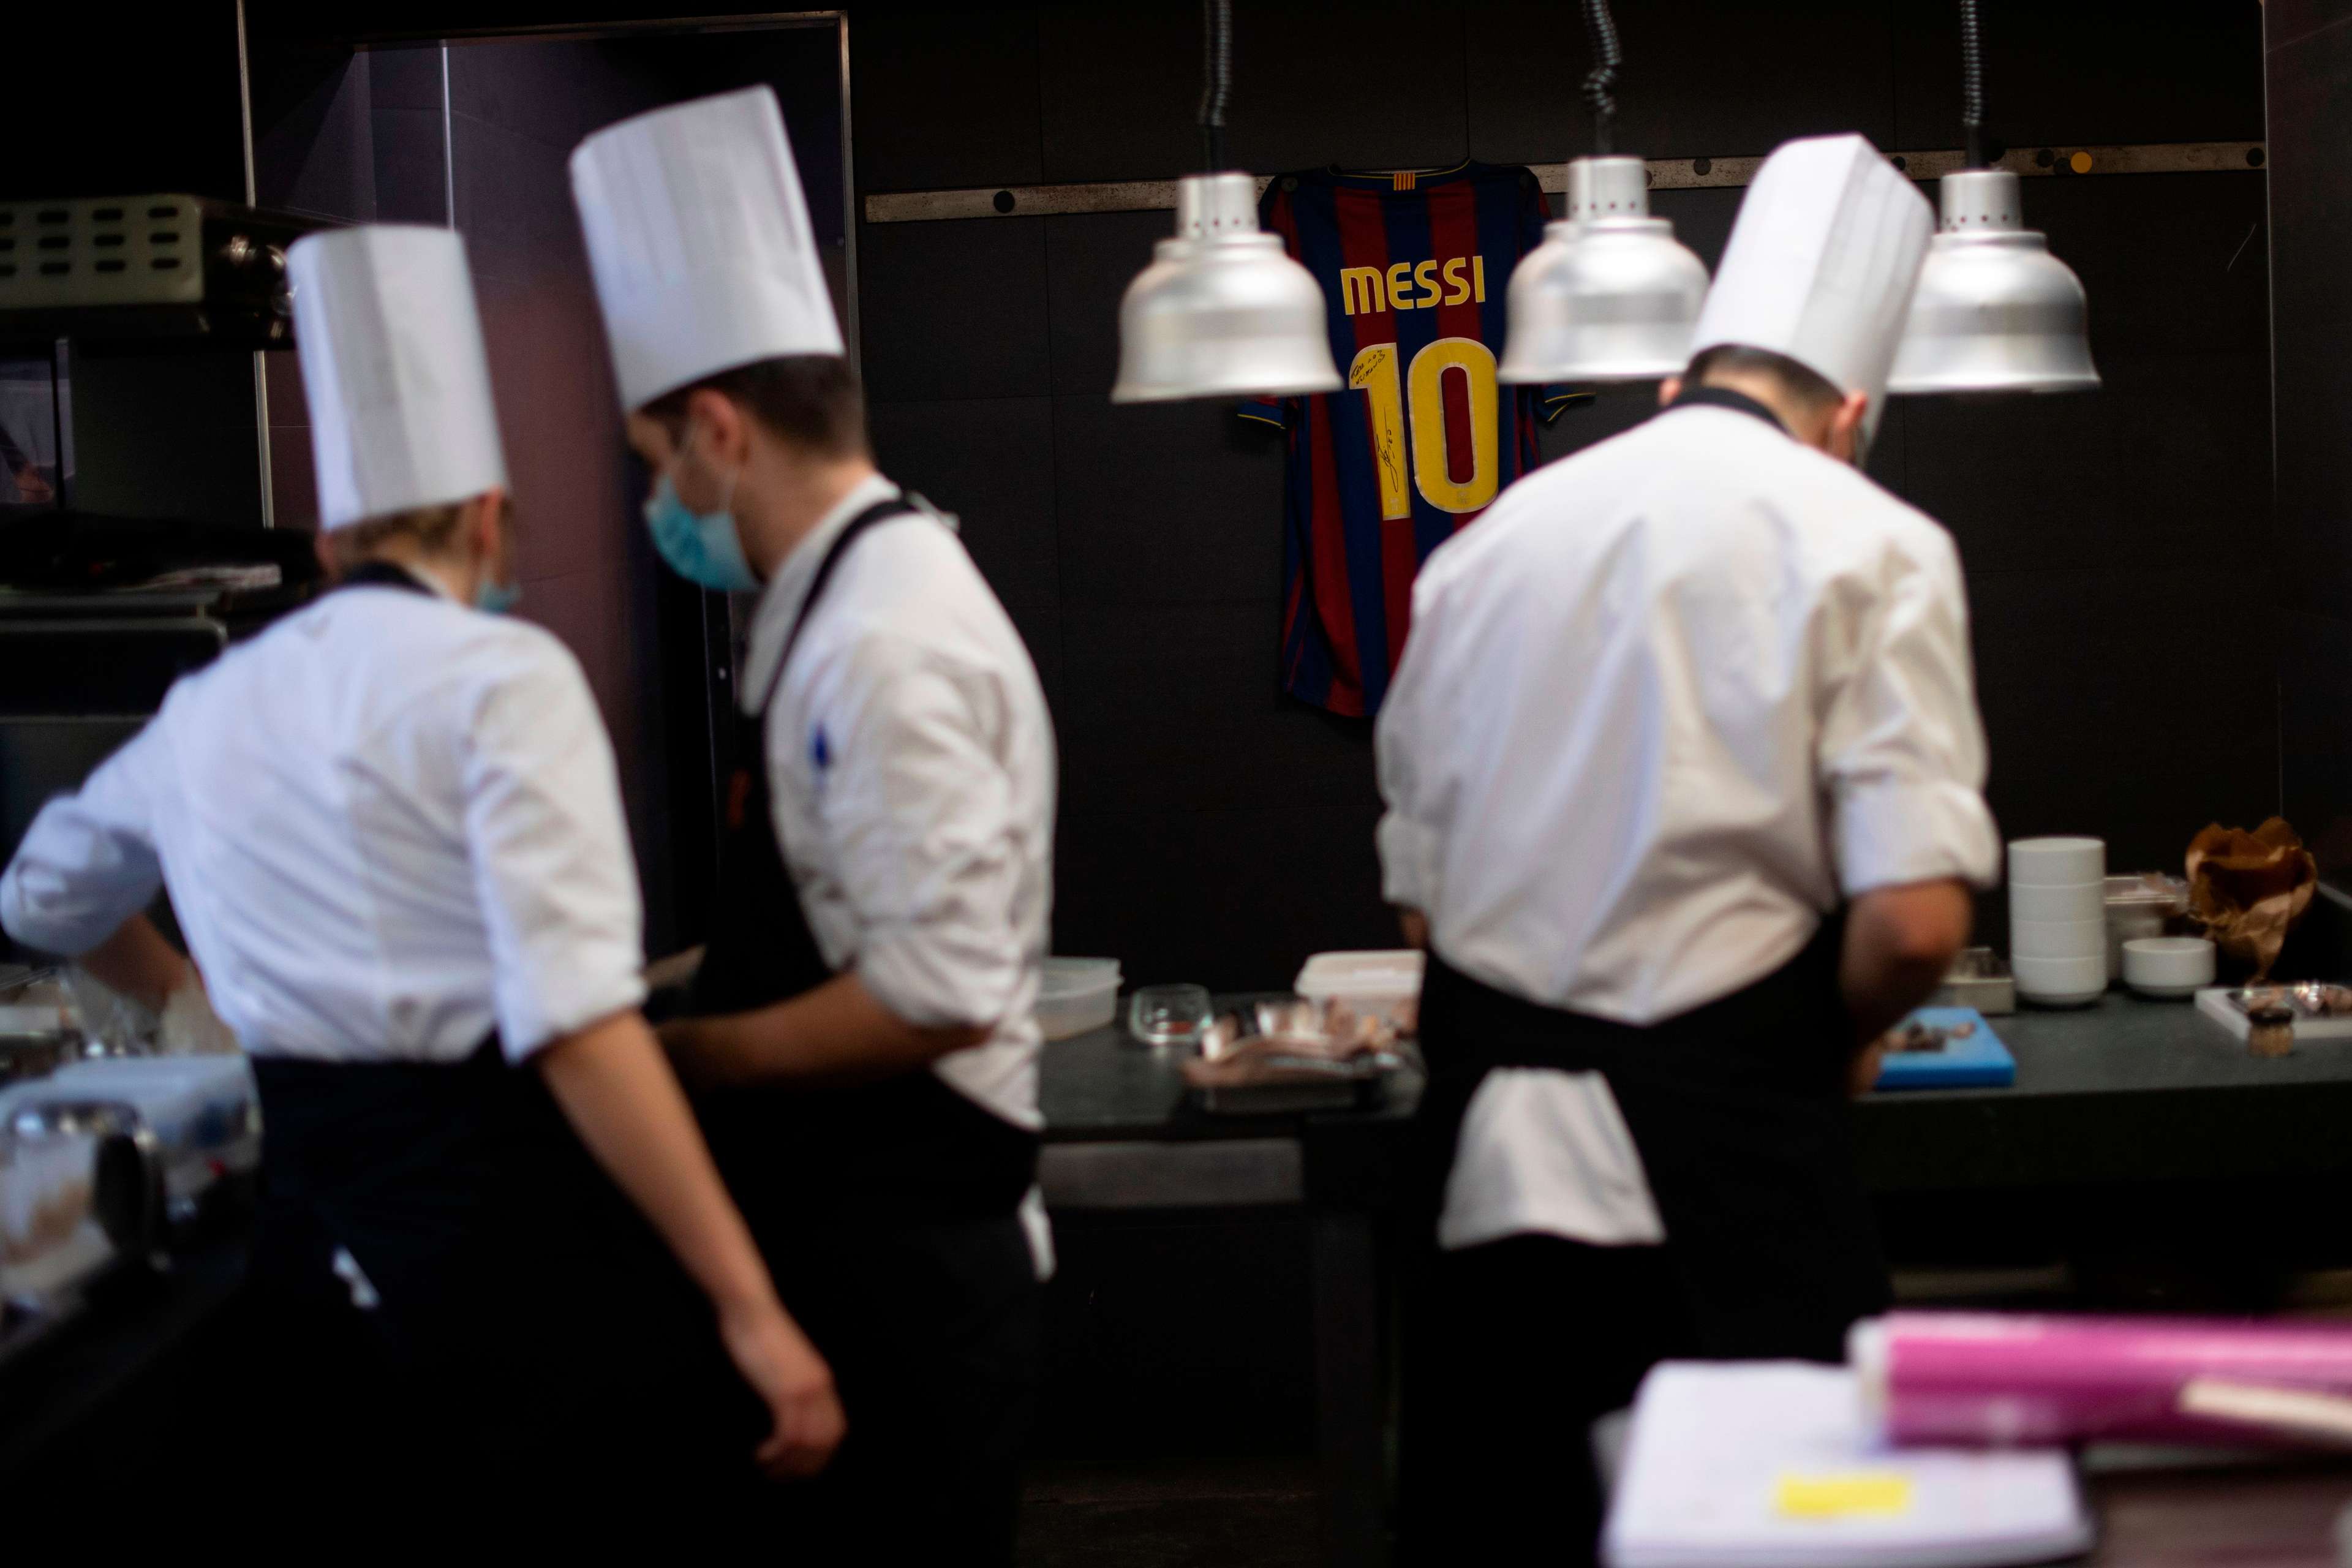 Chefs in kitchen with Messi shirt